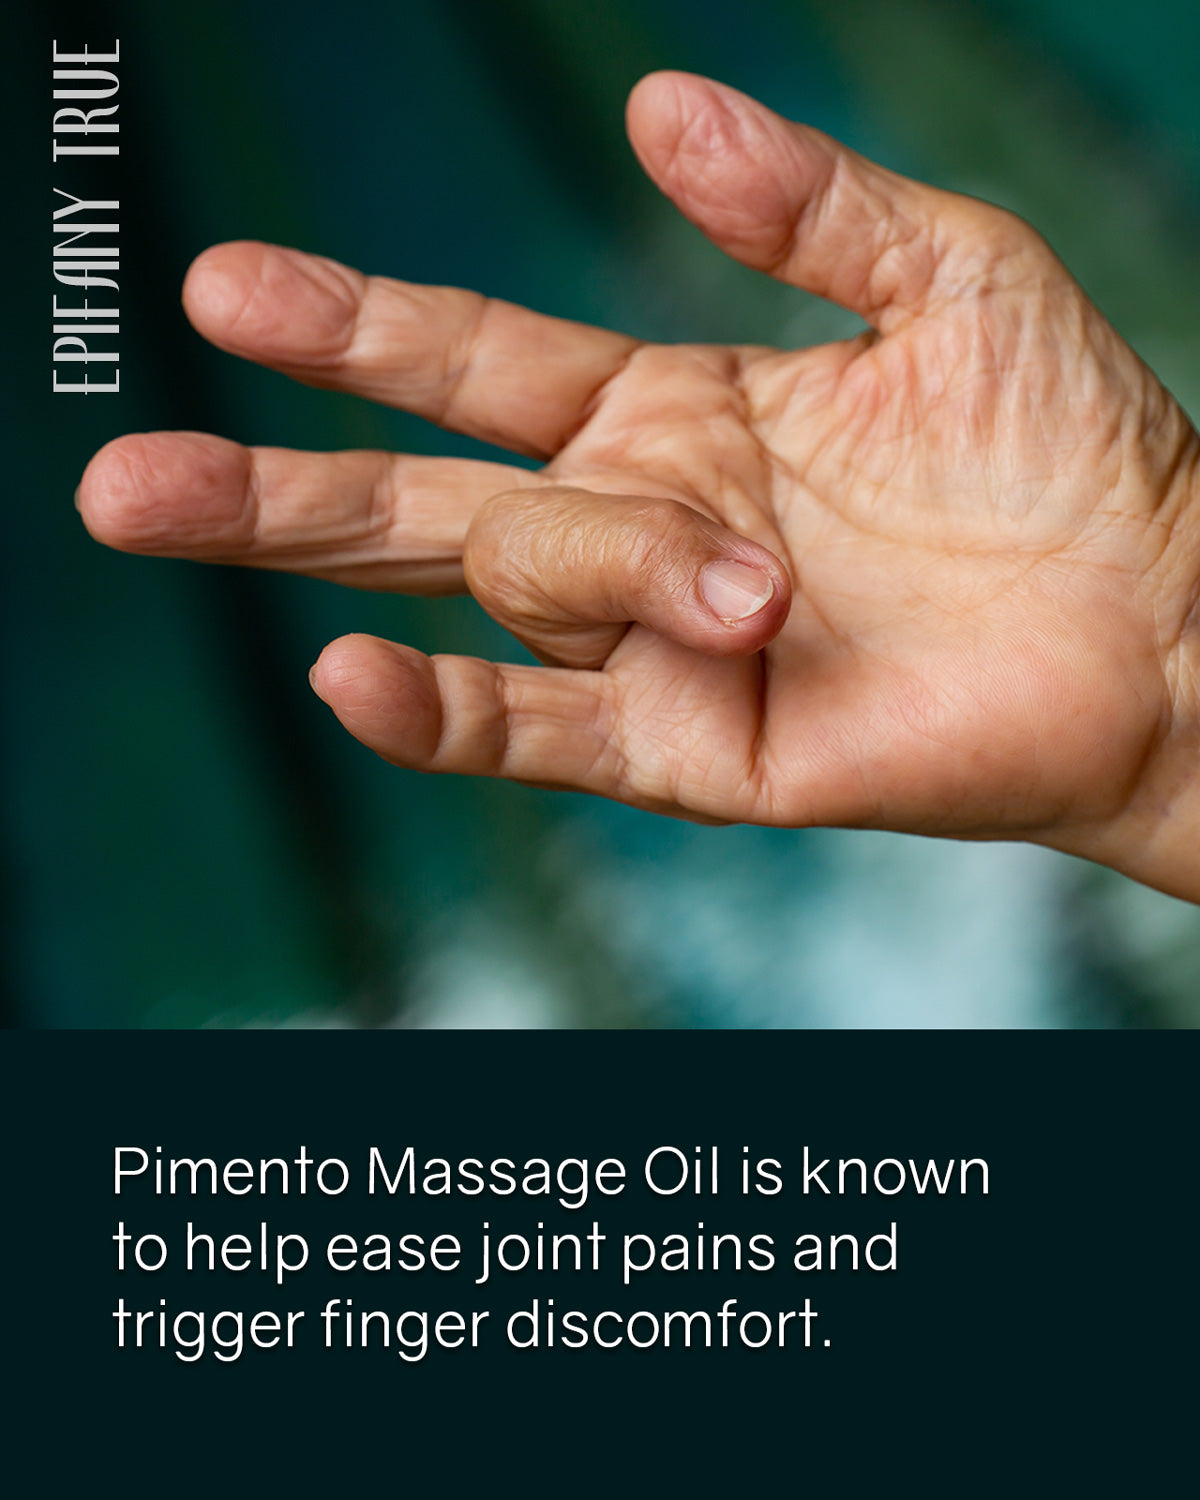 Epifany True Pimento Massage Oil 2oz is known to help ease joint pains and trigger finger discomfort.